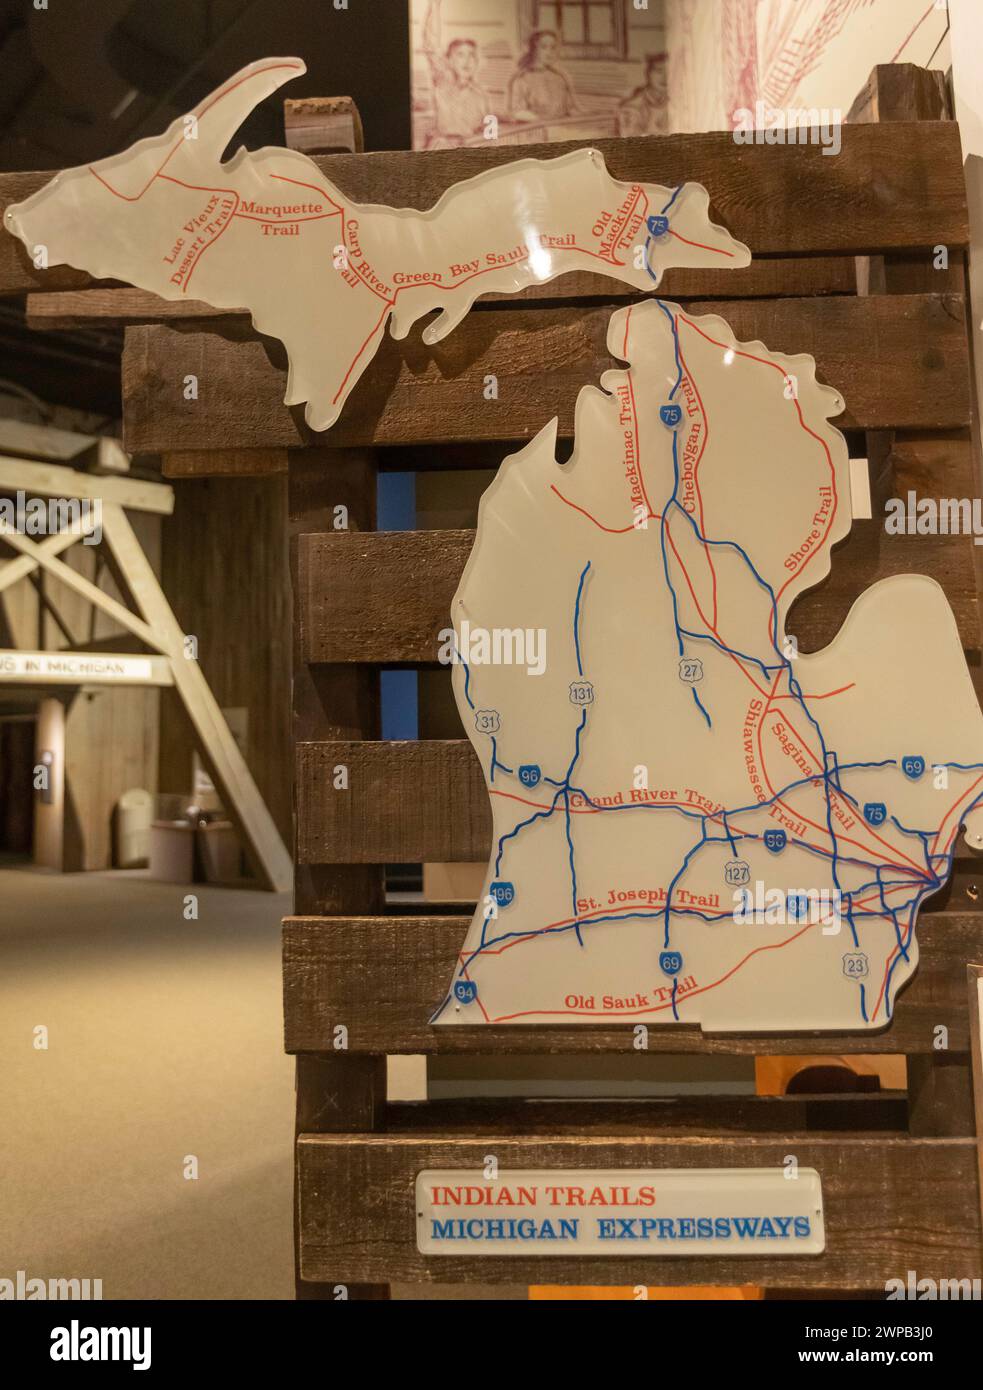 Lansing, Michigan - The Michigan History Museum. A map compares trails used by Native Americans with the routes of modern expressways. Stock Photo